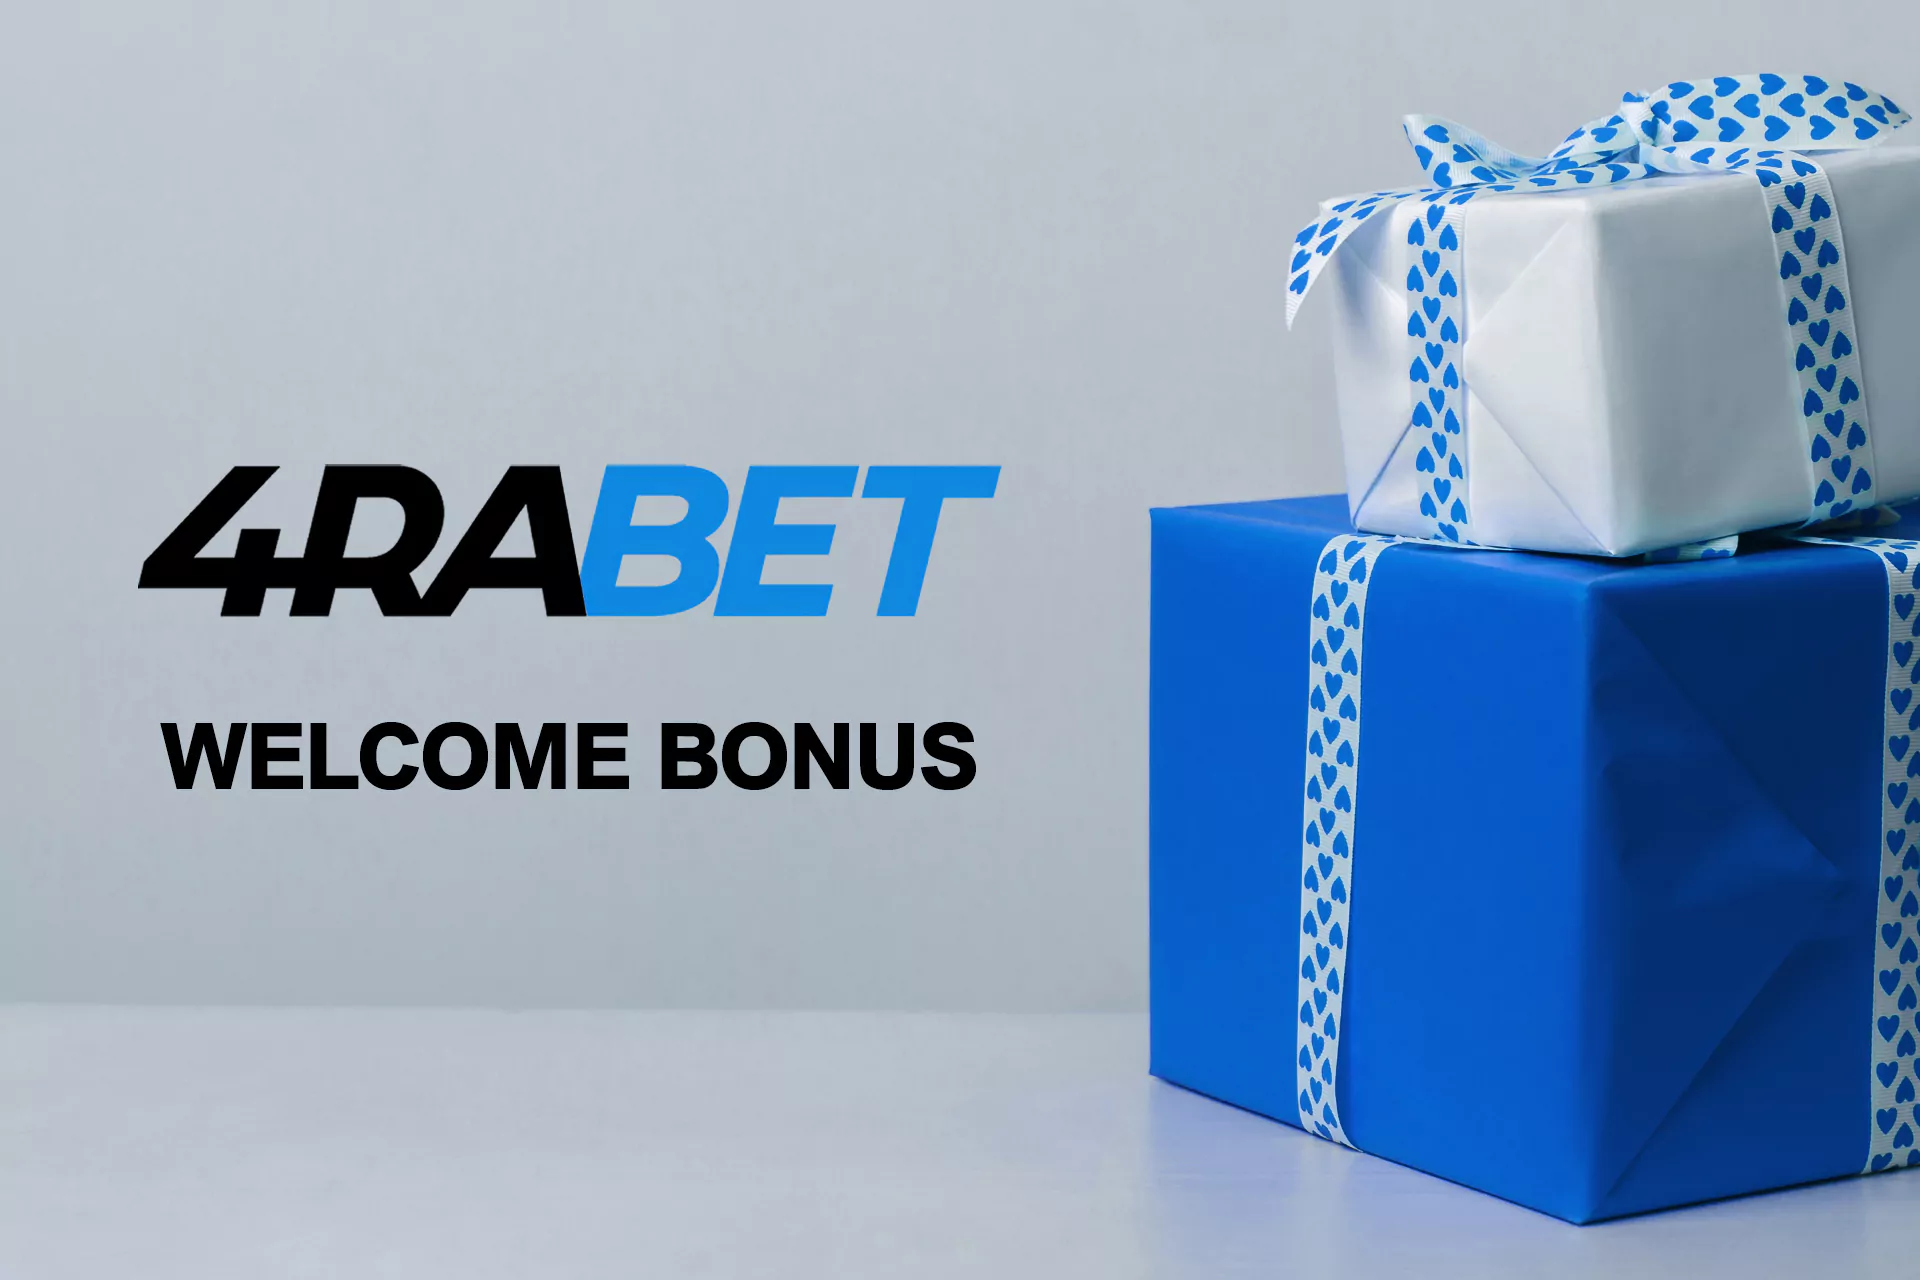 If you are a new user don't lose the welcome bonus.